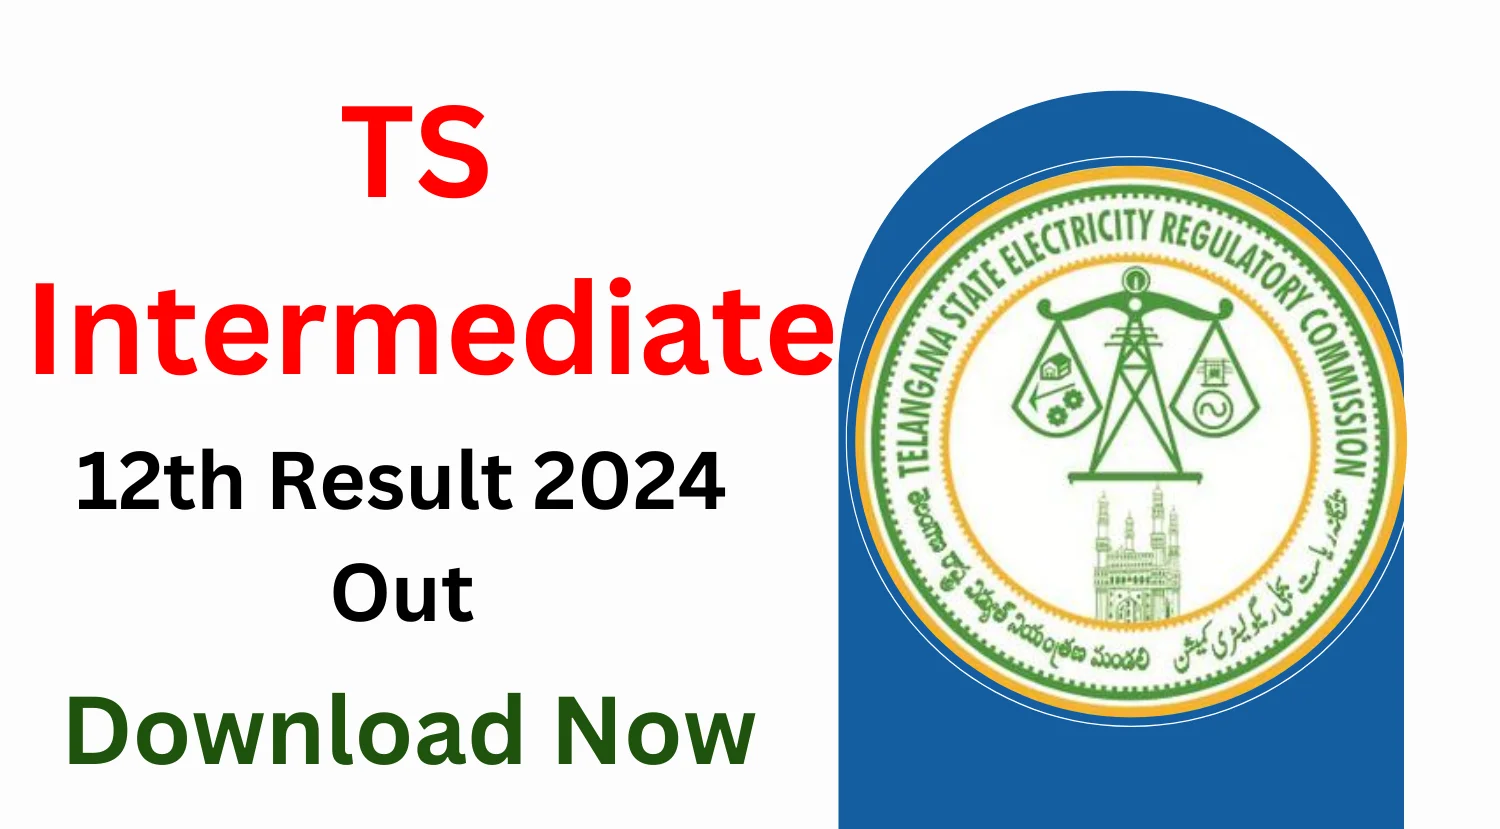 TS Intermediate 12th Result 2024 Out